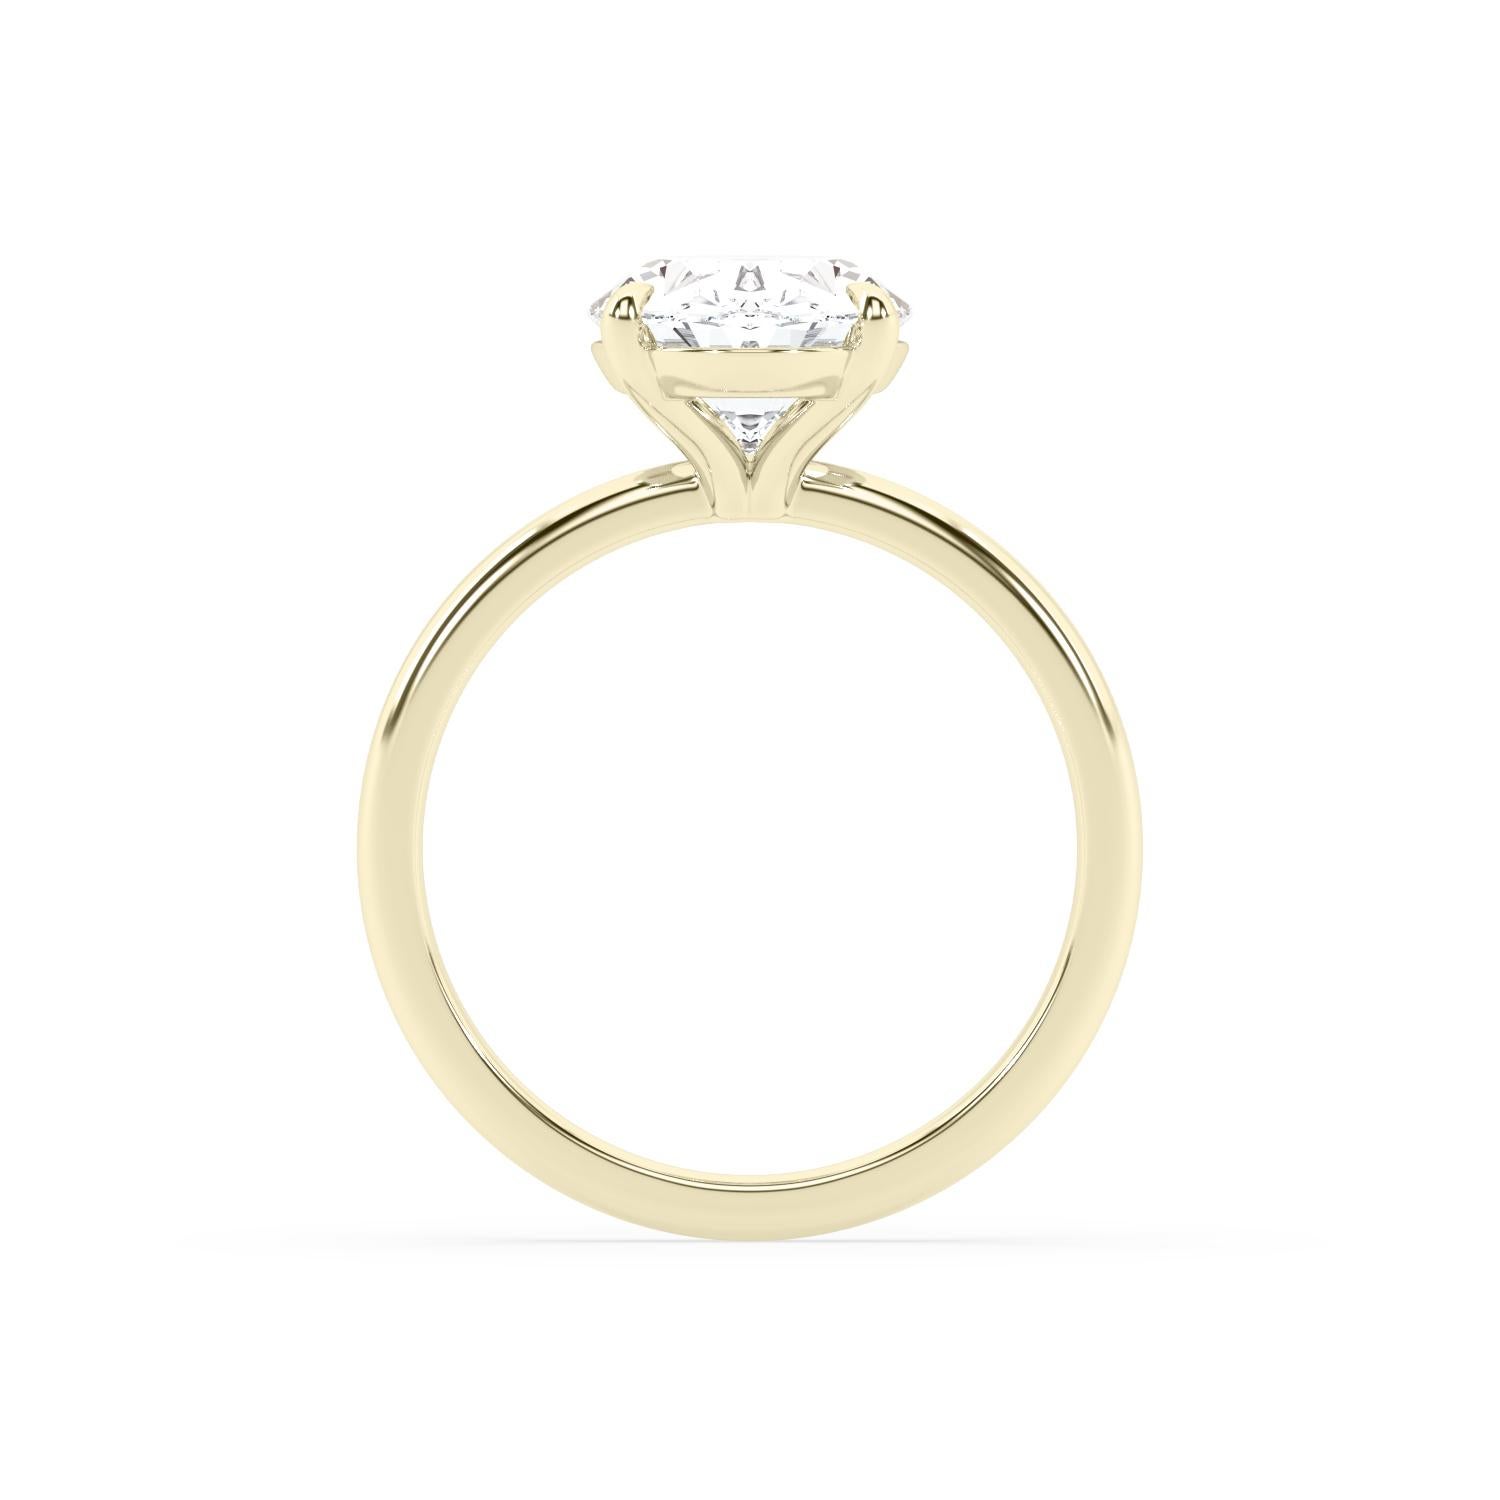 2 carat solitaire oval diamond ring